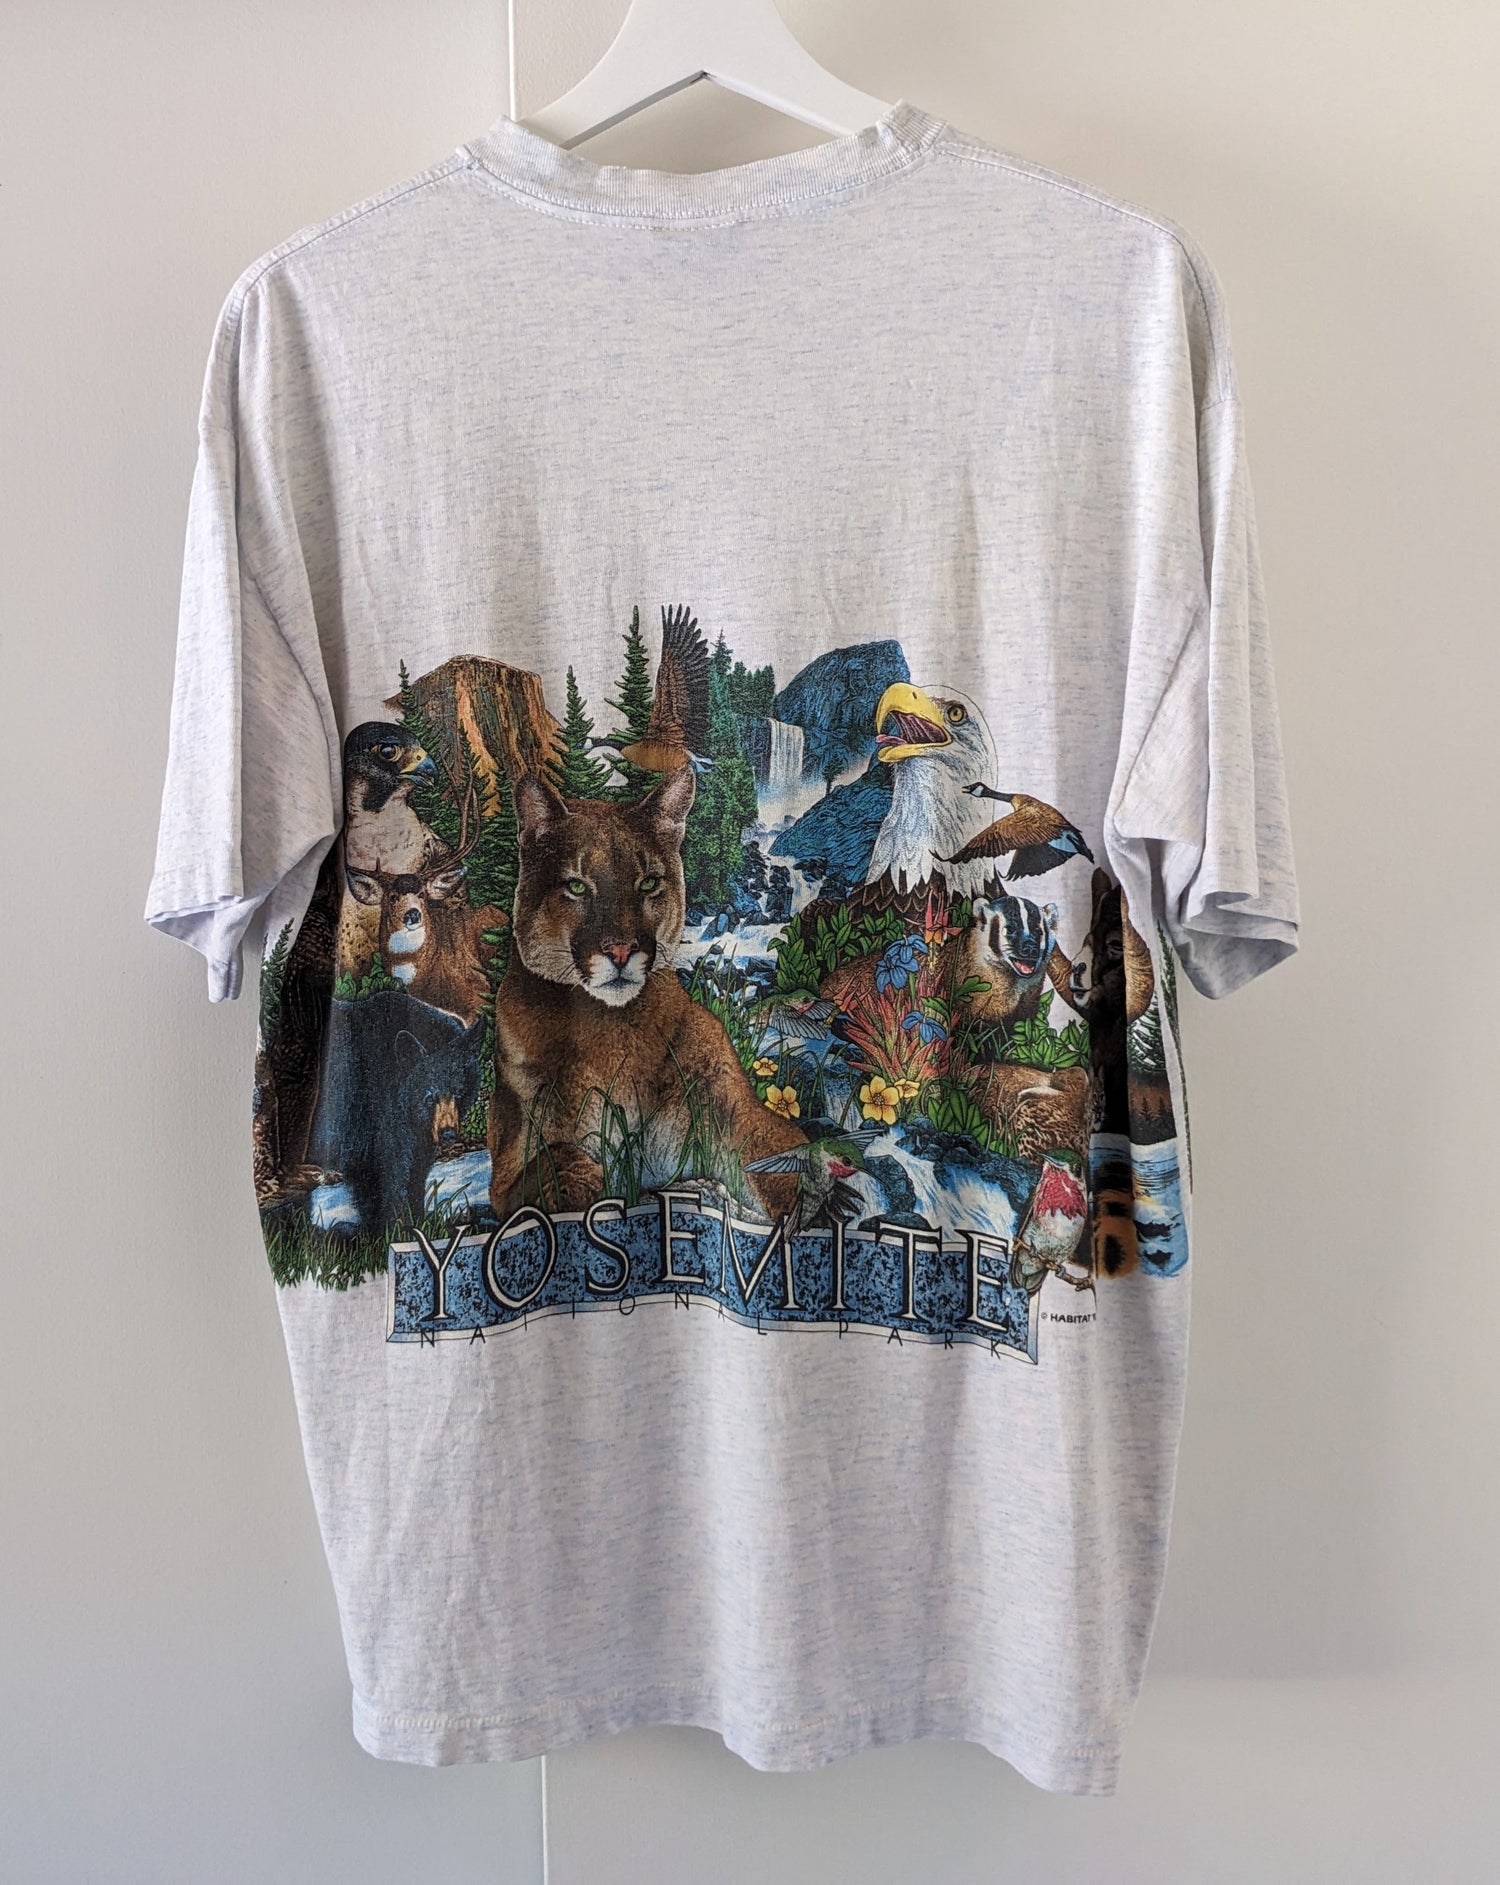 Heather gray Yosemite Habitat shirt with mountain lion, eagle, deer and more animals back side